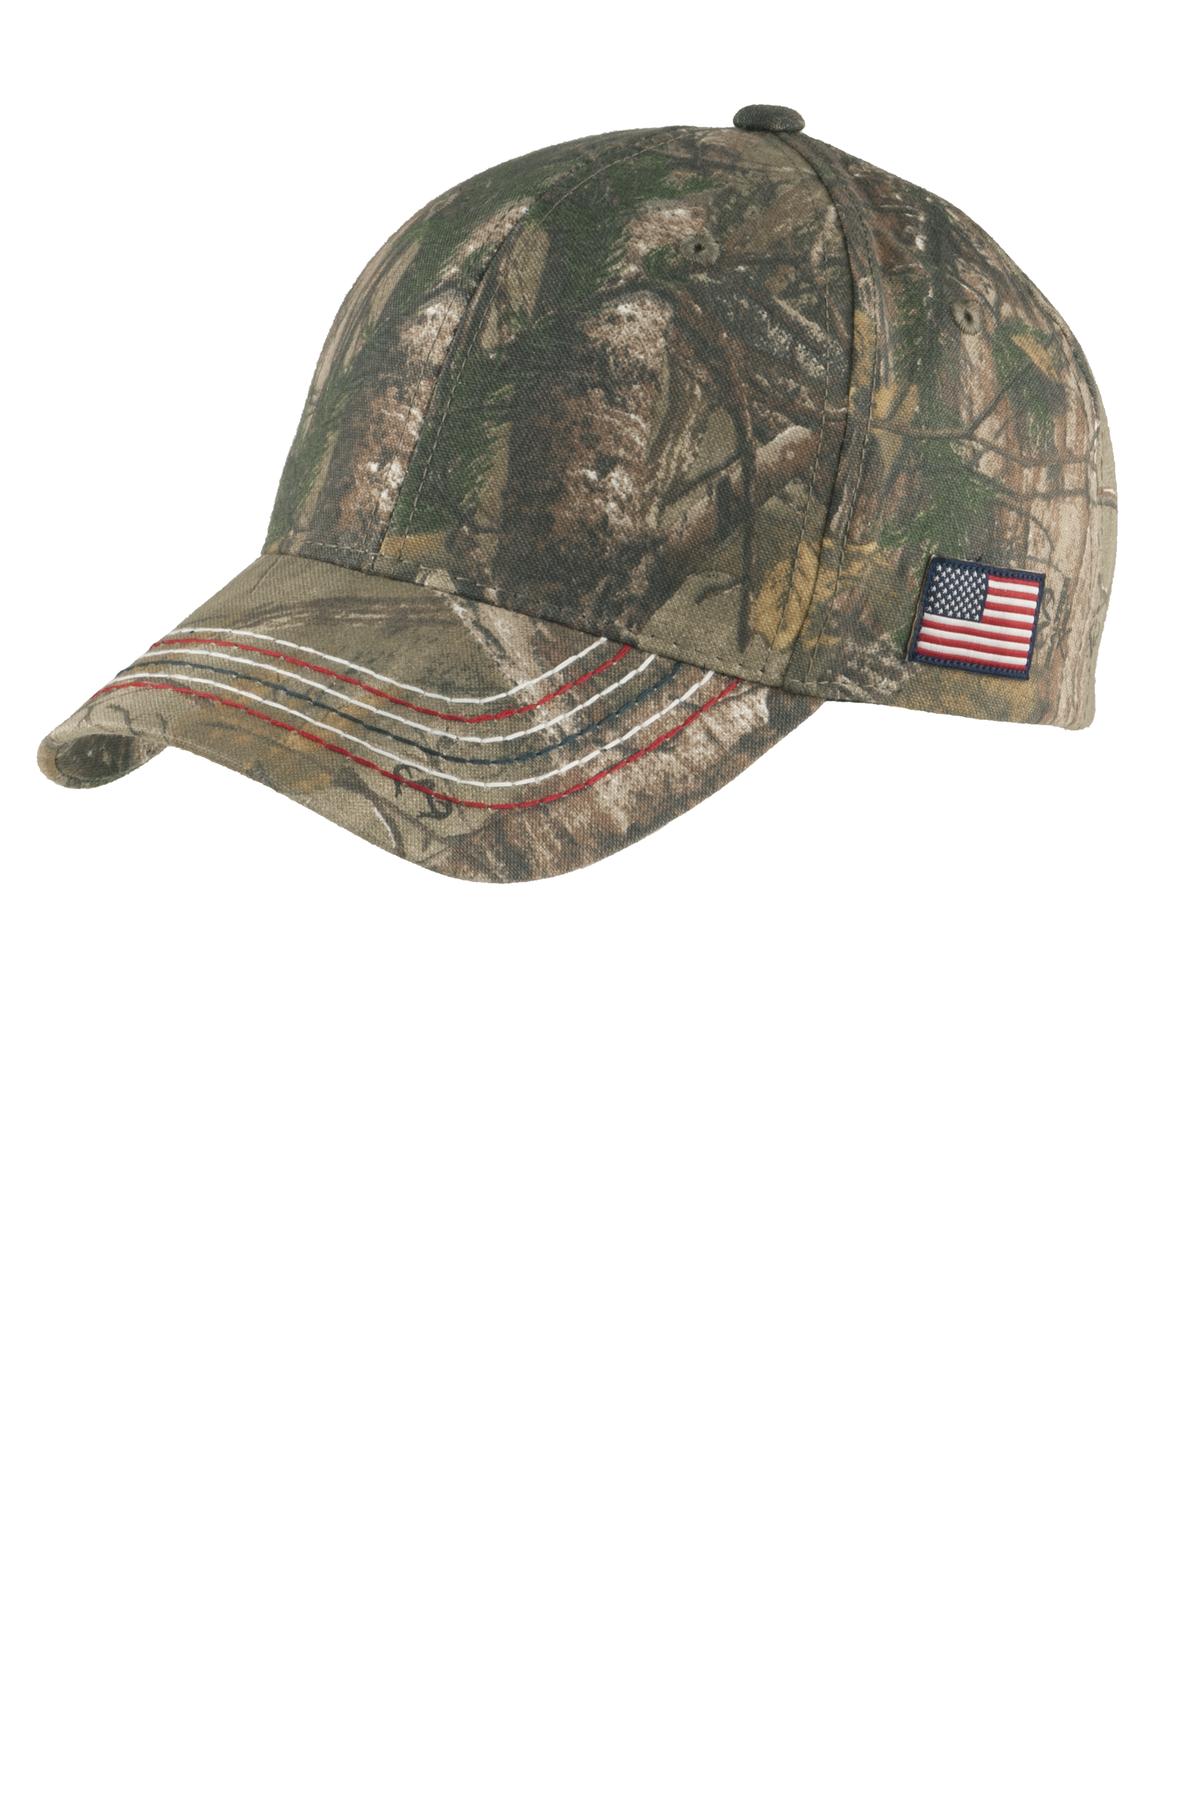 Selected Color is Realtree Xtra